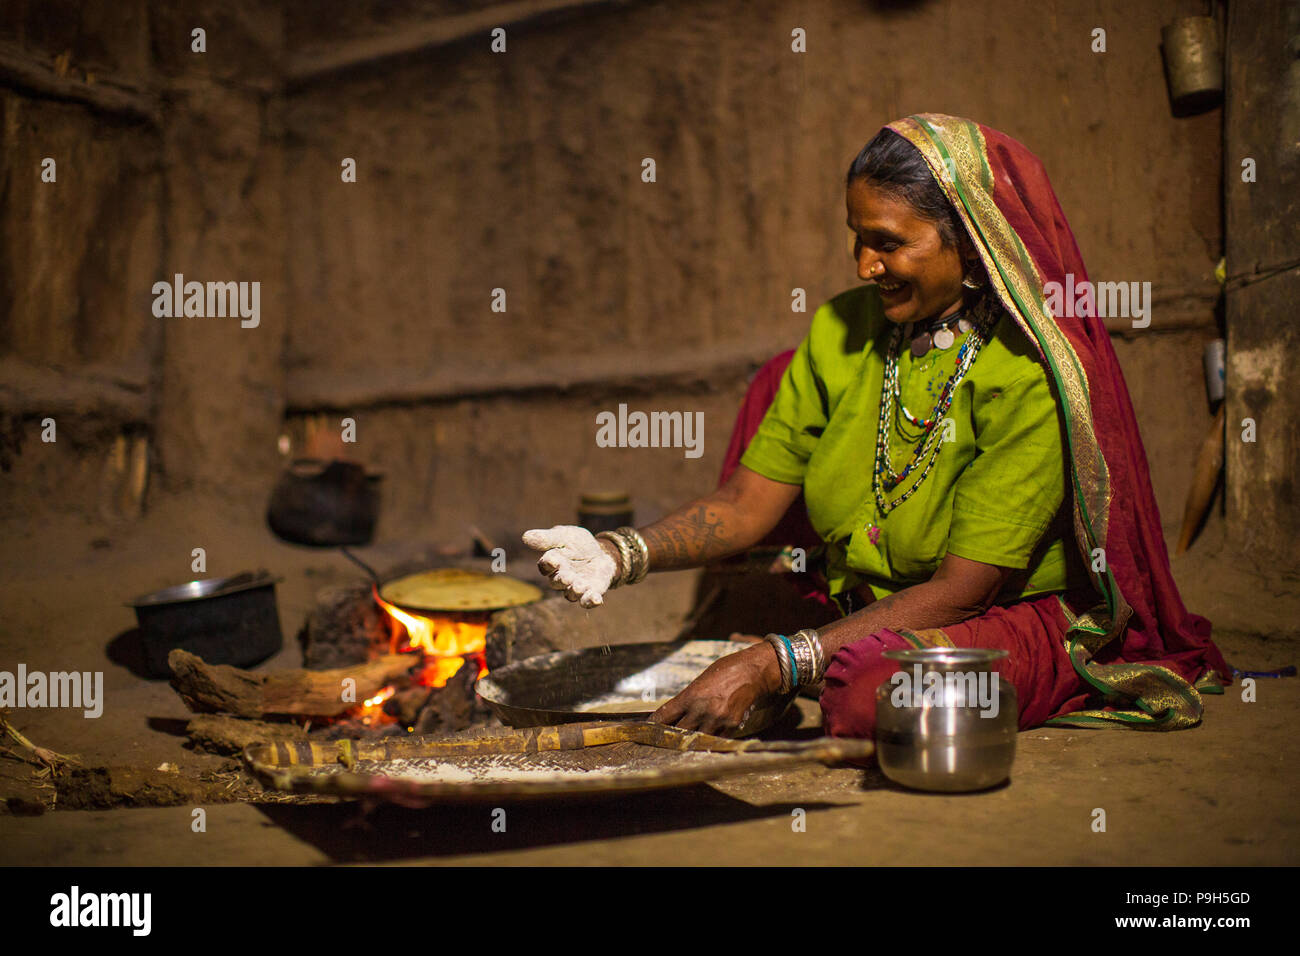 A woman making chapatis on an open fire in her kitchen, Sendhwa, India. Stock Photo